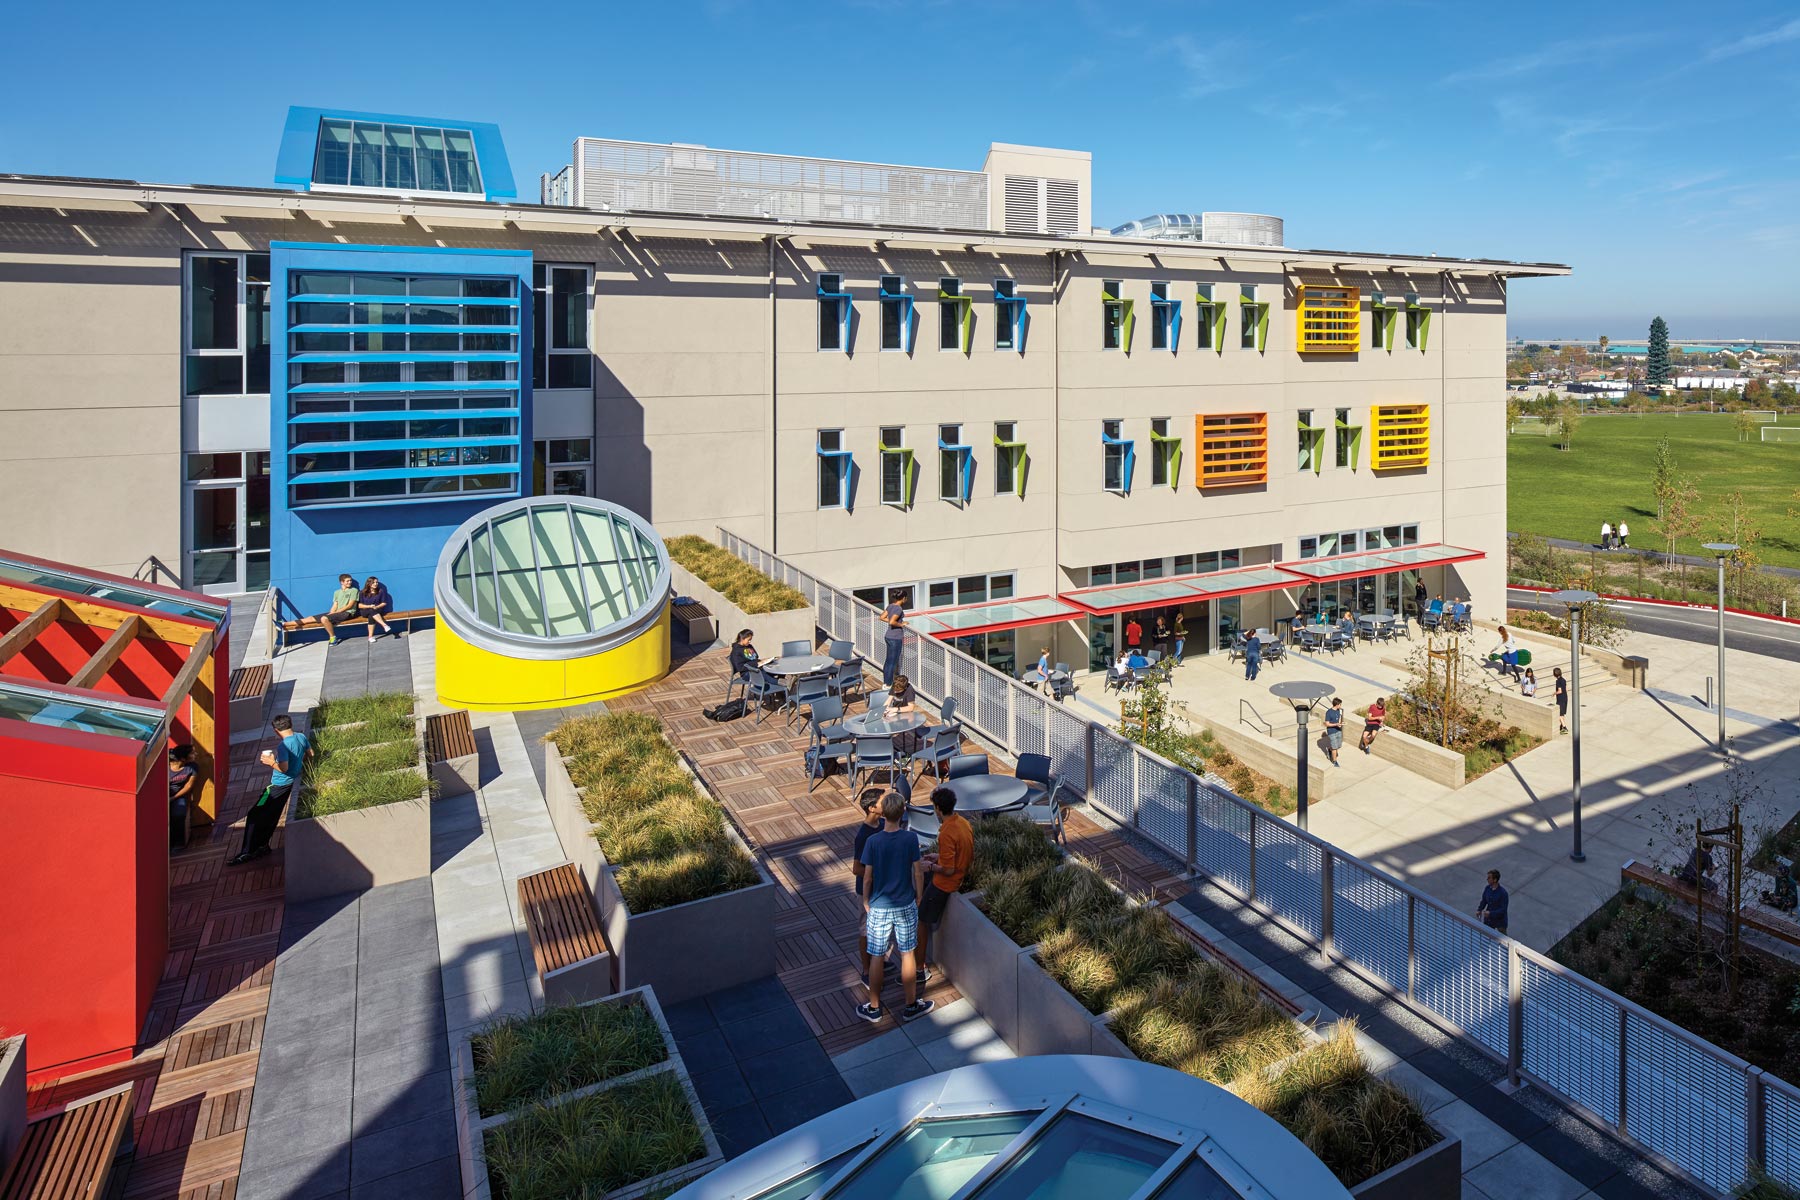 The Nueva School at Bay Meadows is a nationally-recognized sustainable model for innovative educational environments for 21st century learners located in the San Francisco Bay Area; the campus is certified LEED Gold.